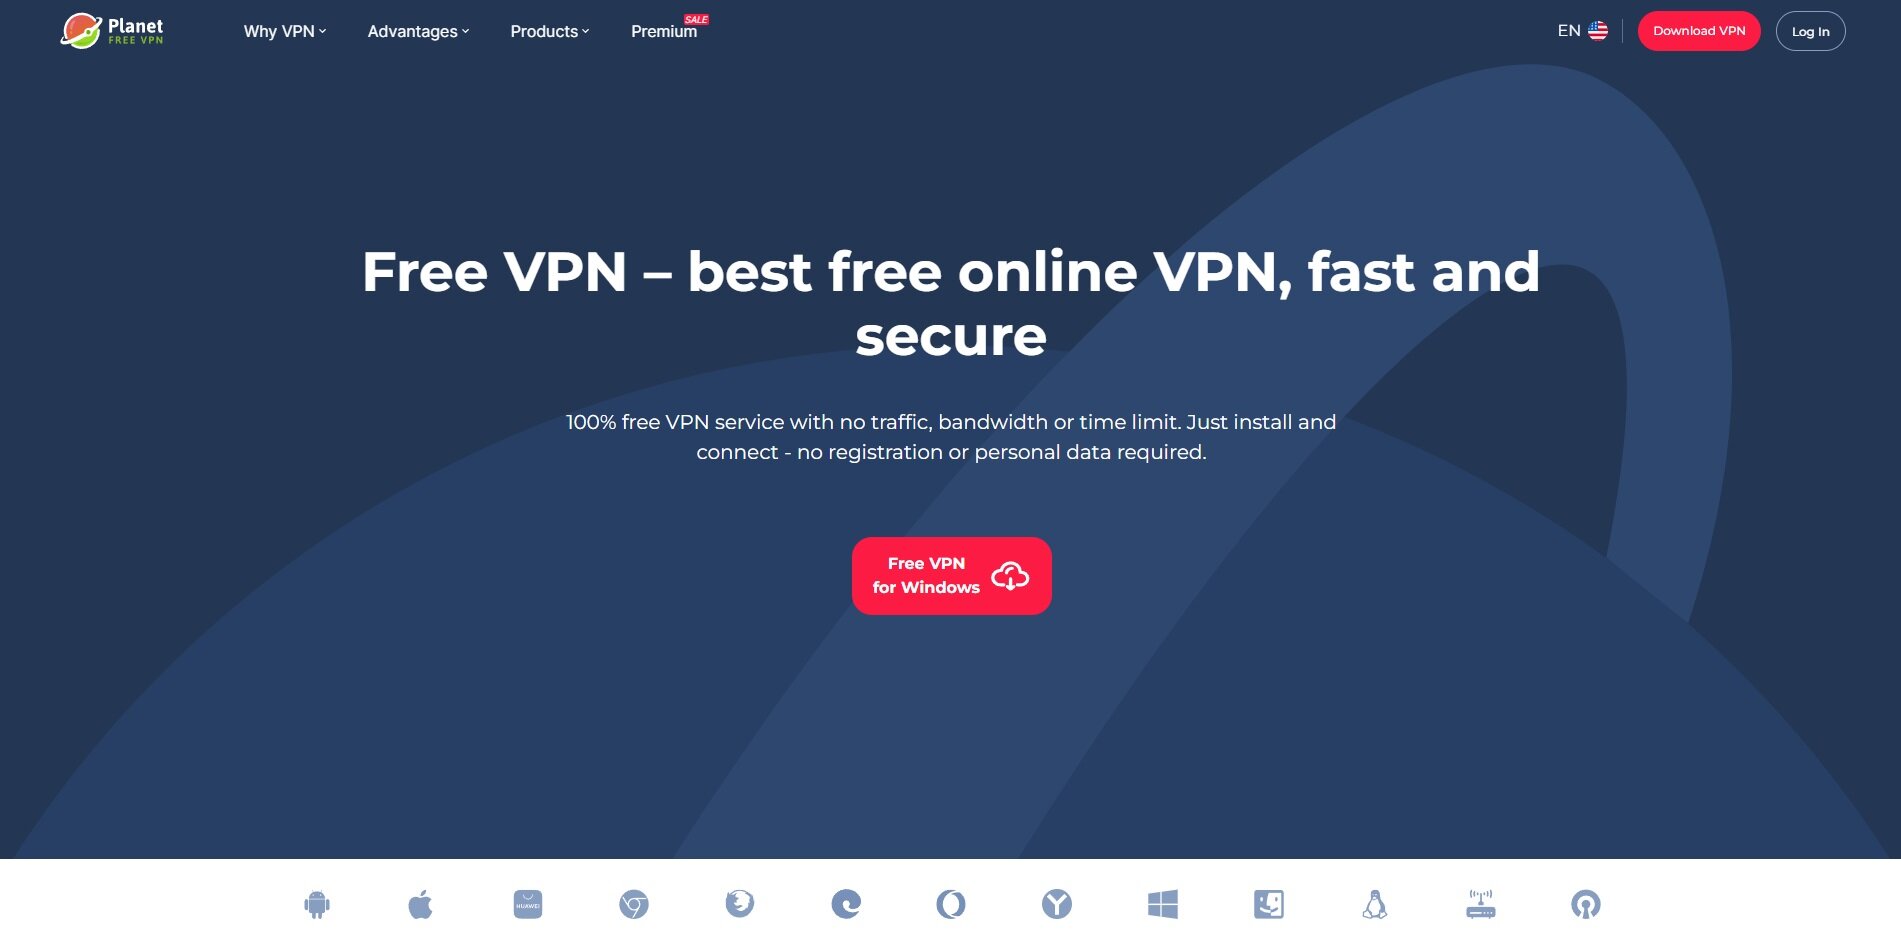 Freevpnplanet.com – Review and opinions on the VPN Service